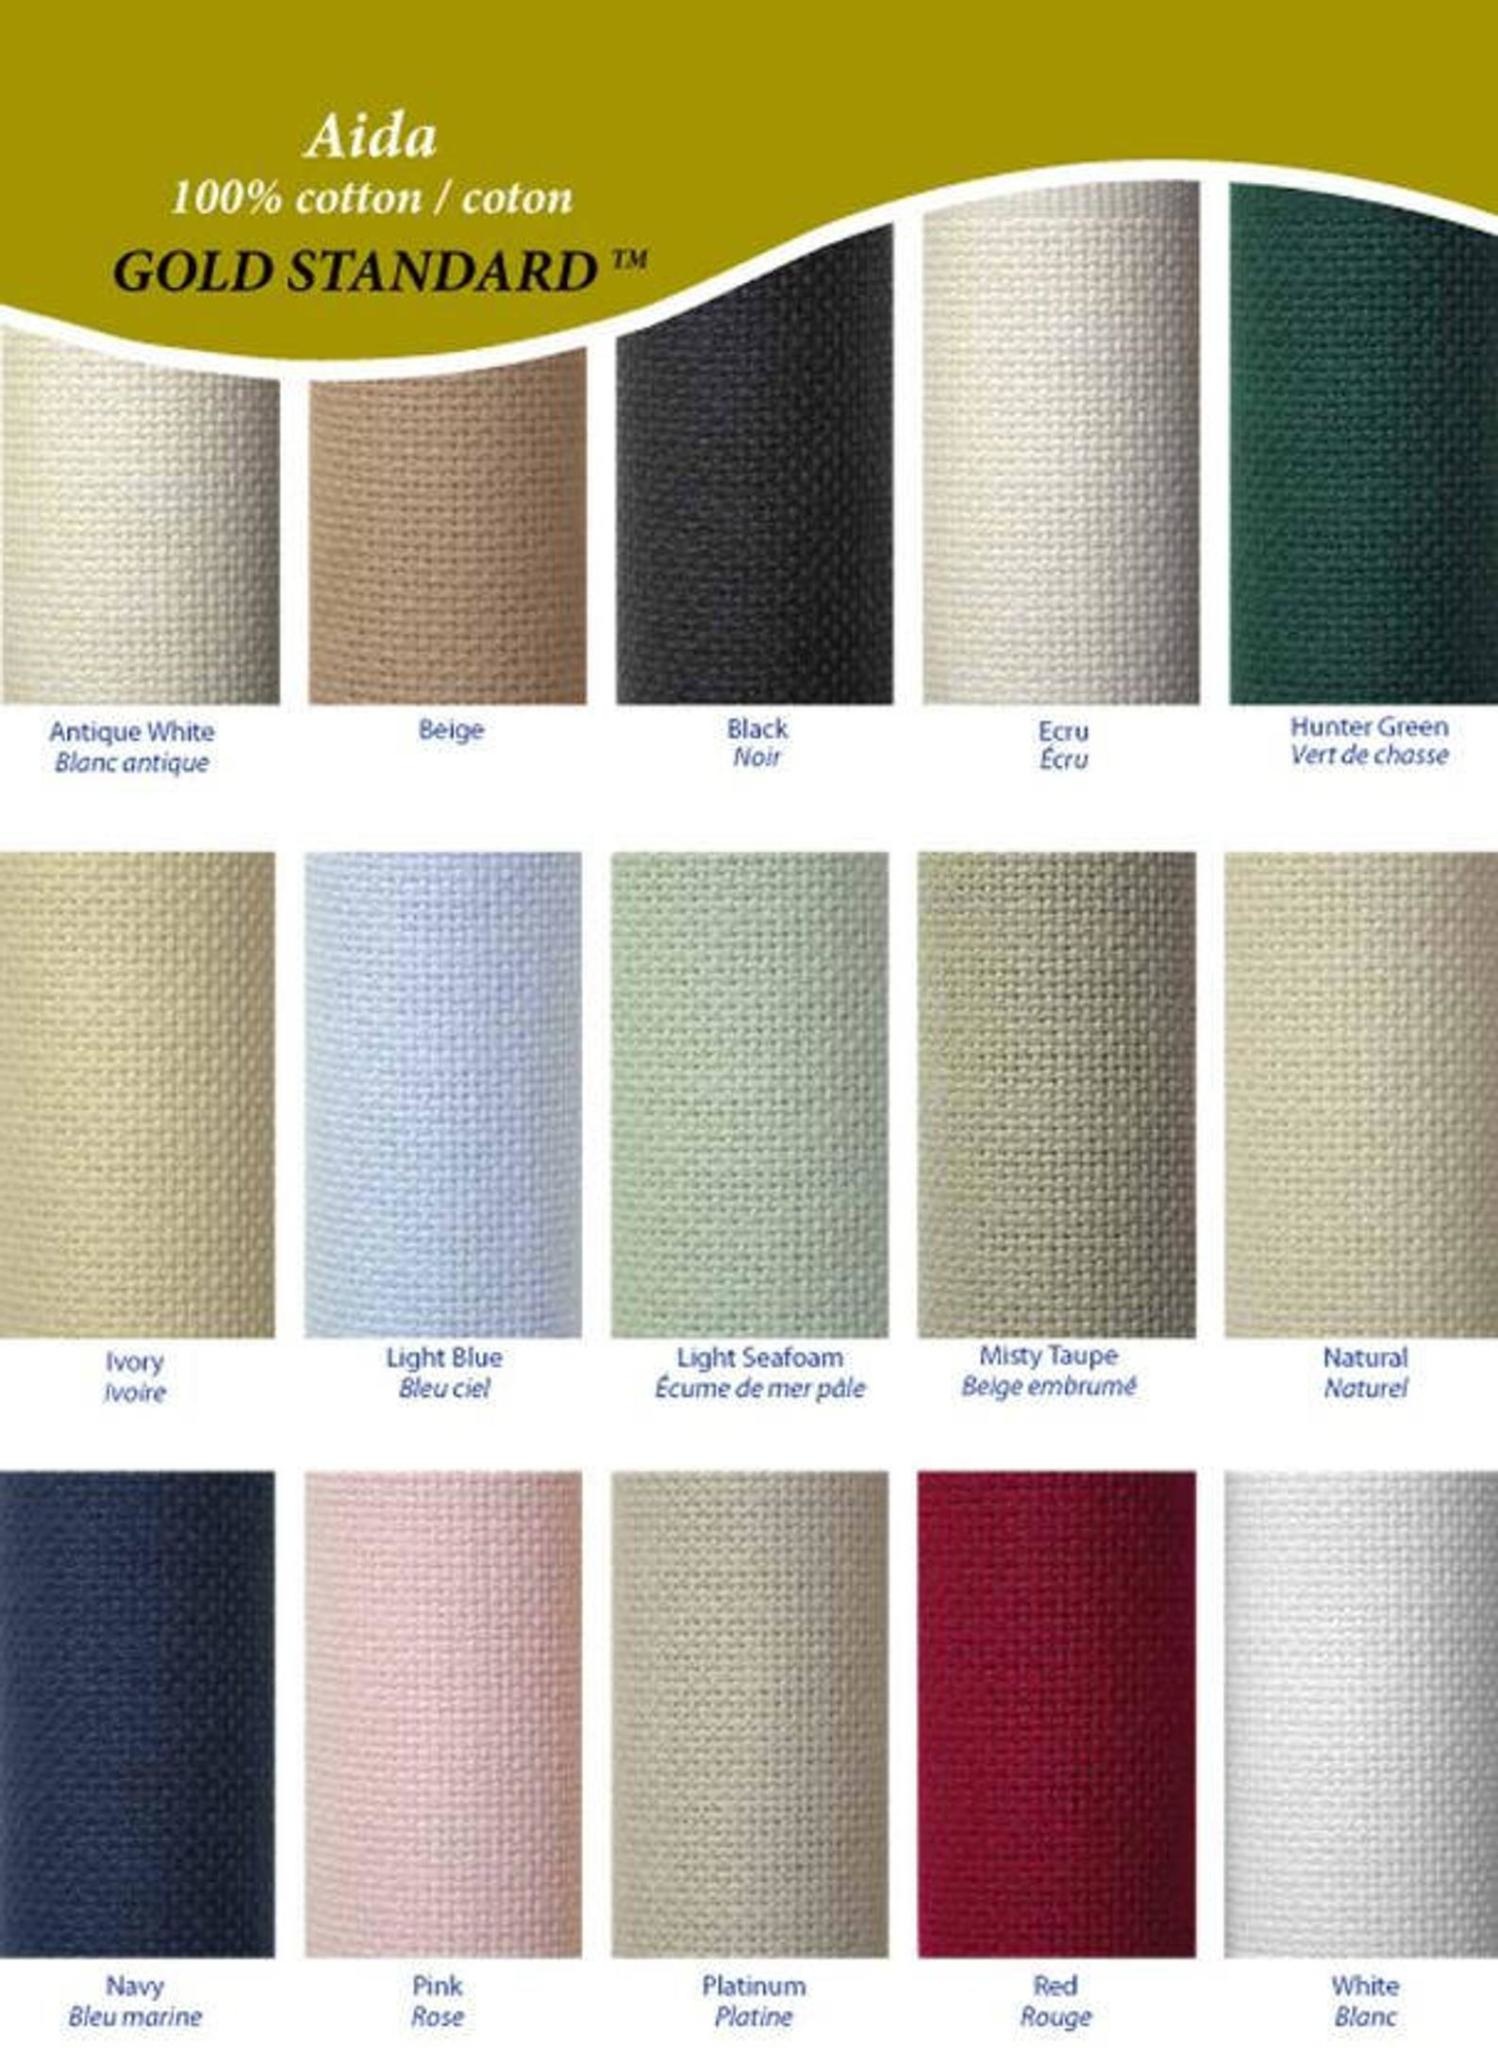 What is the Difference Between 14 and 18 Aida Cloth?